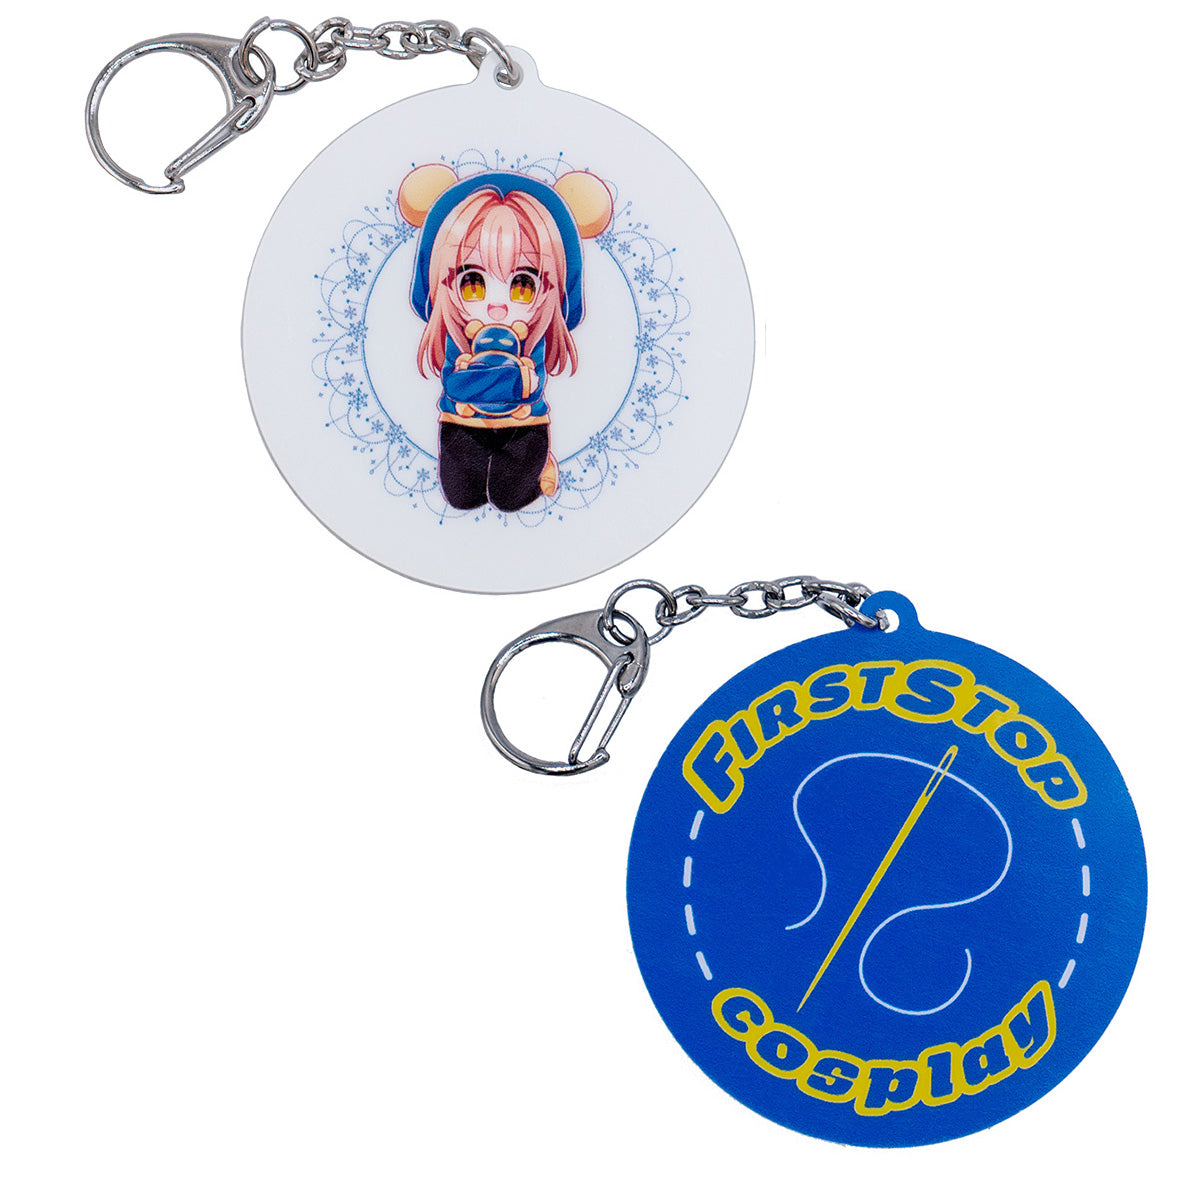 The front and back of the Pan keychain. The back of the keychain says "First Stop Cosplay" with a sewing needle.